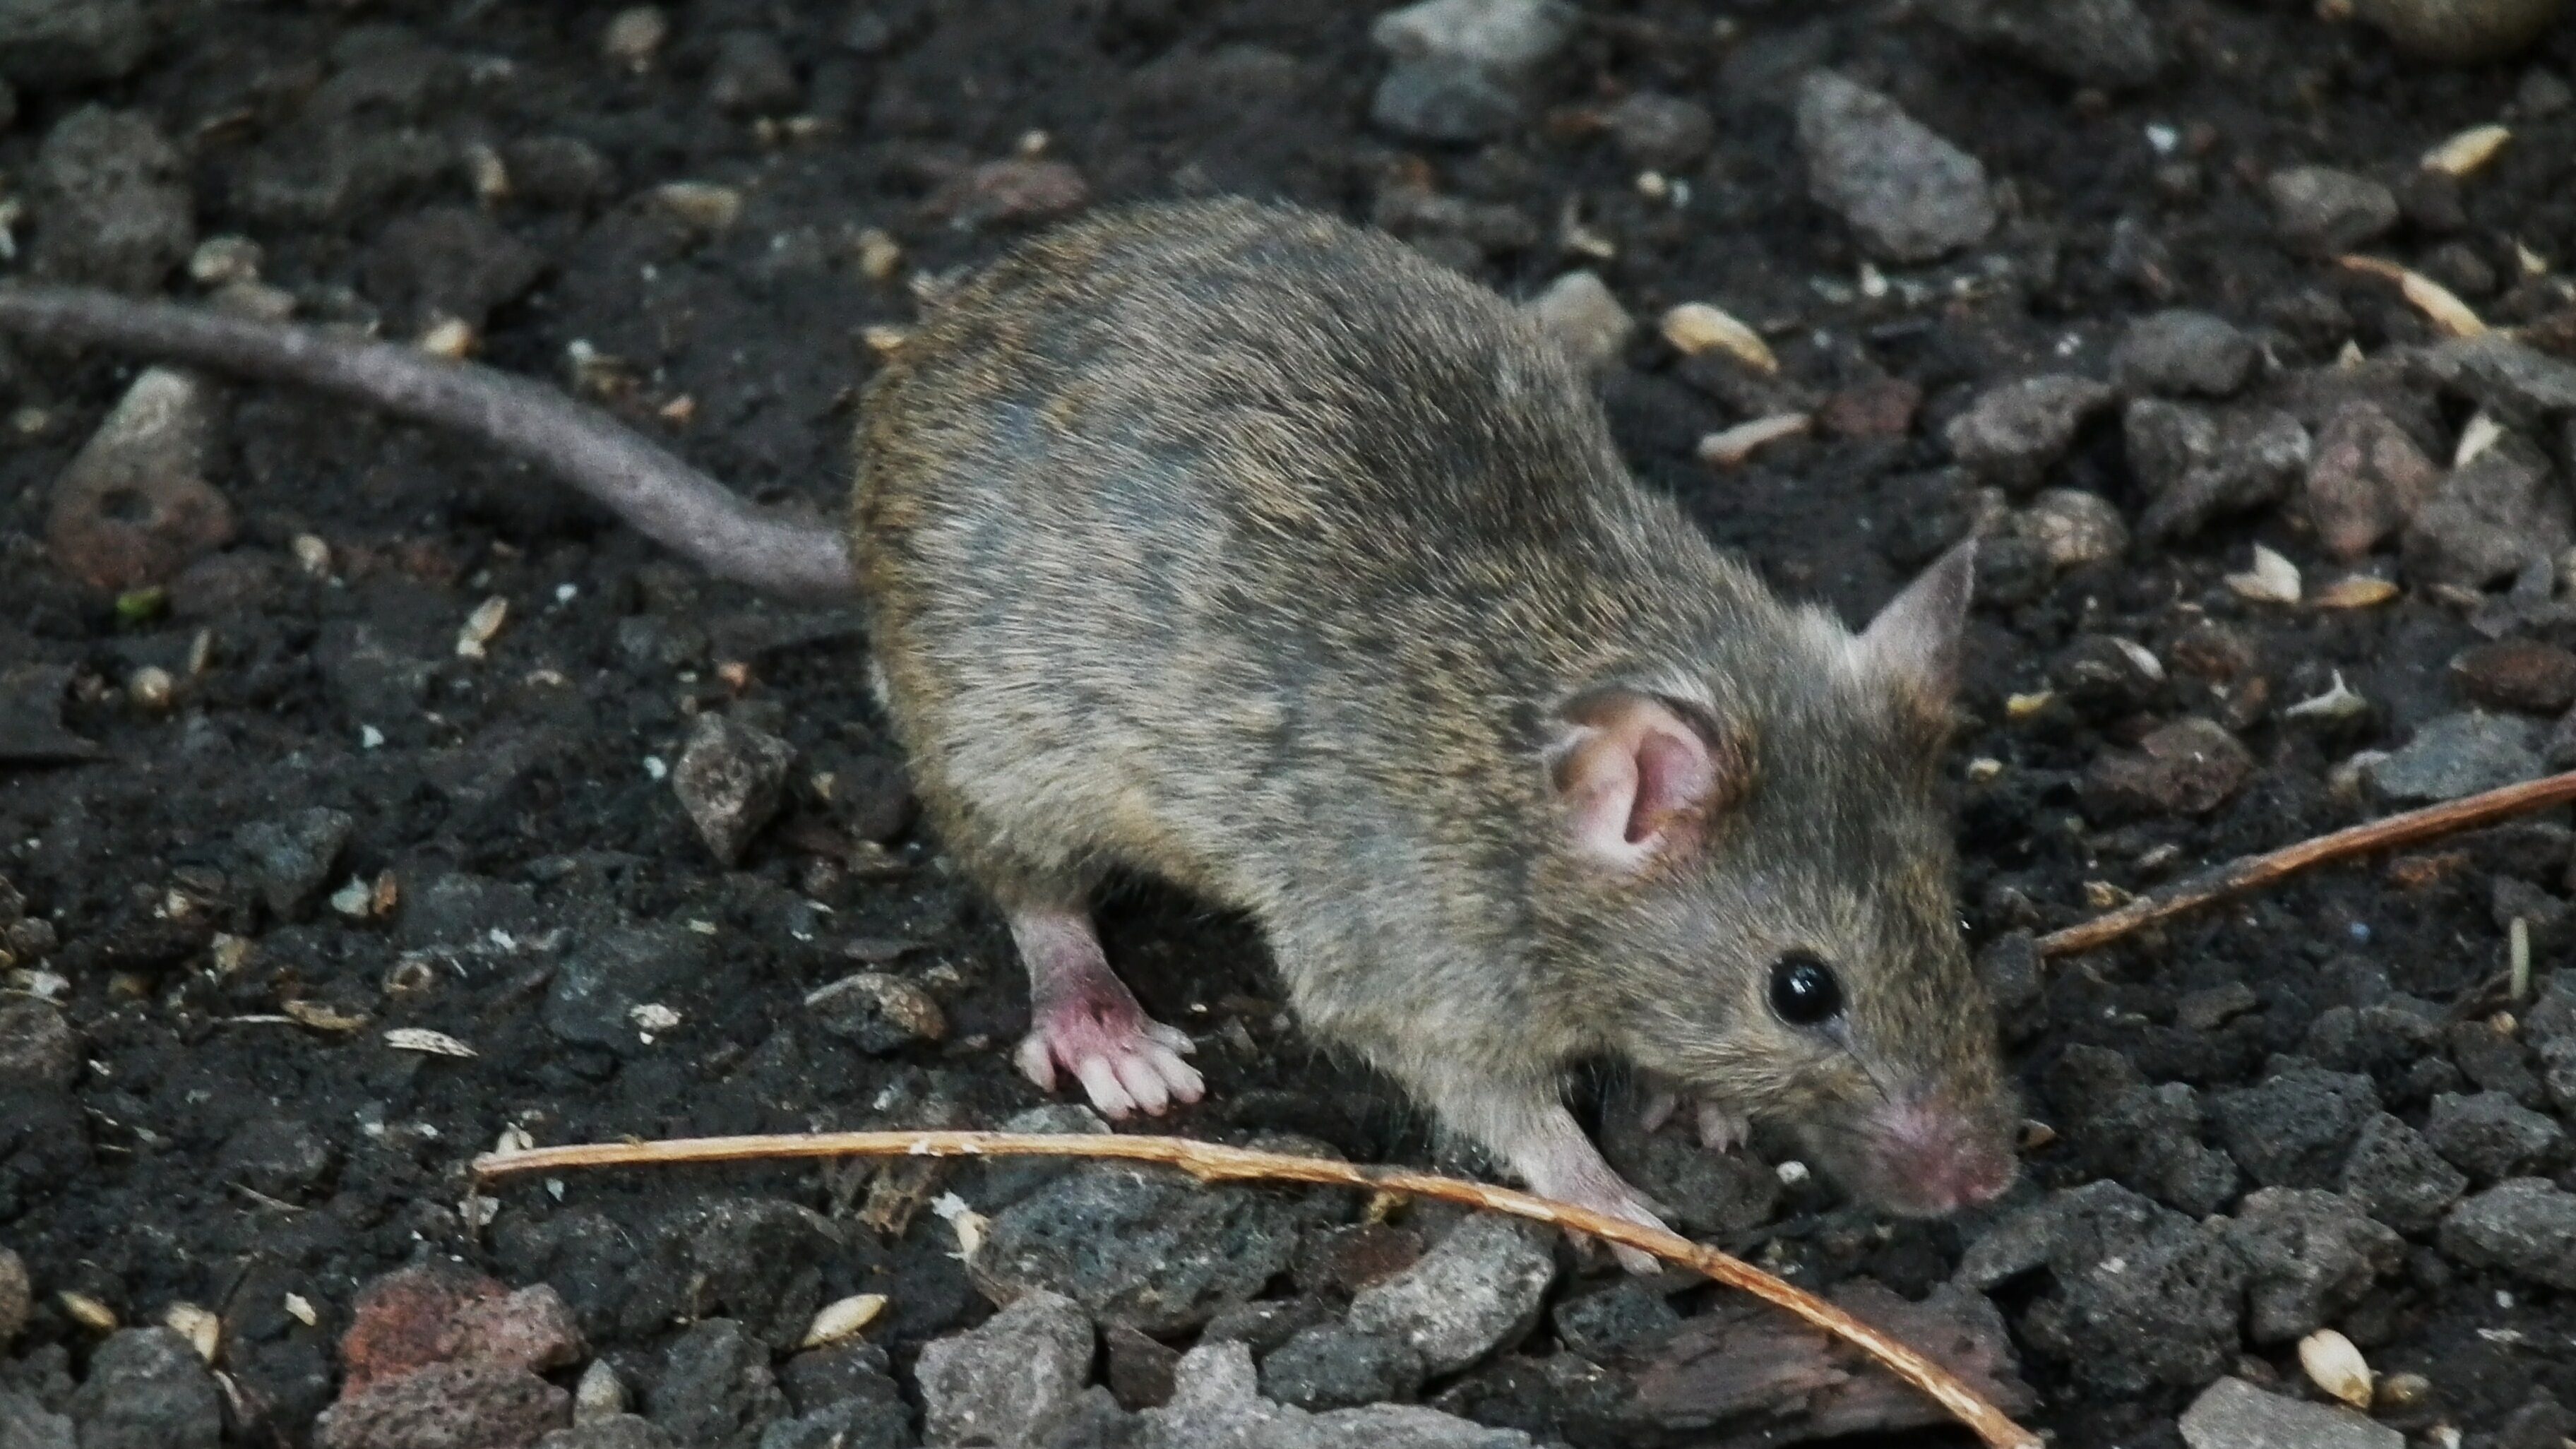 A close up of a mouse